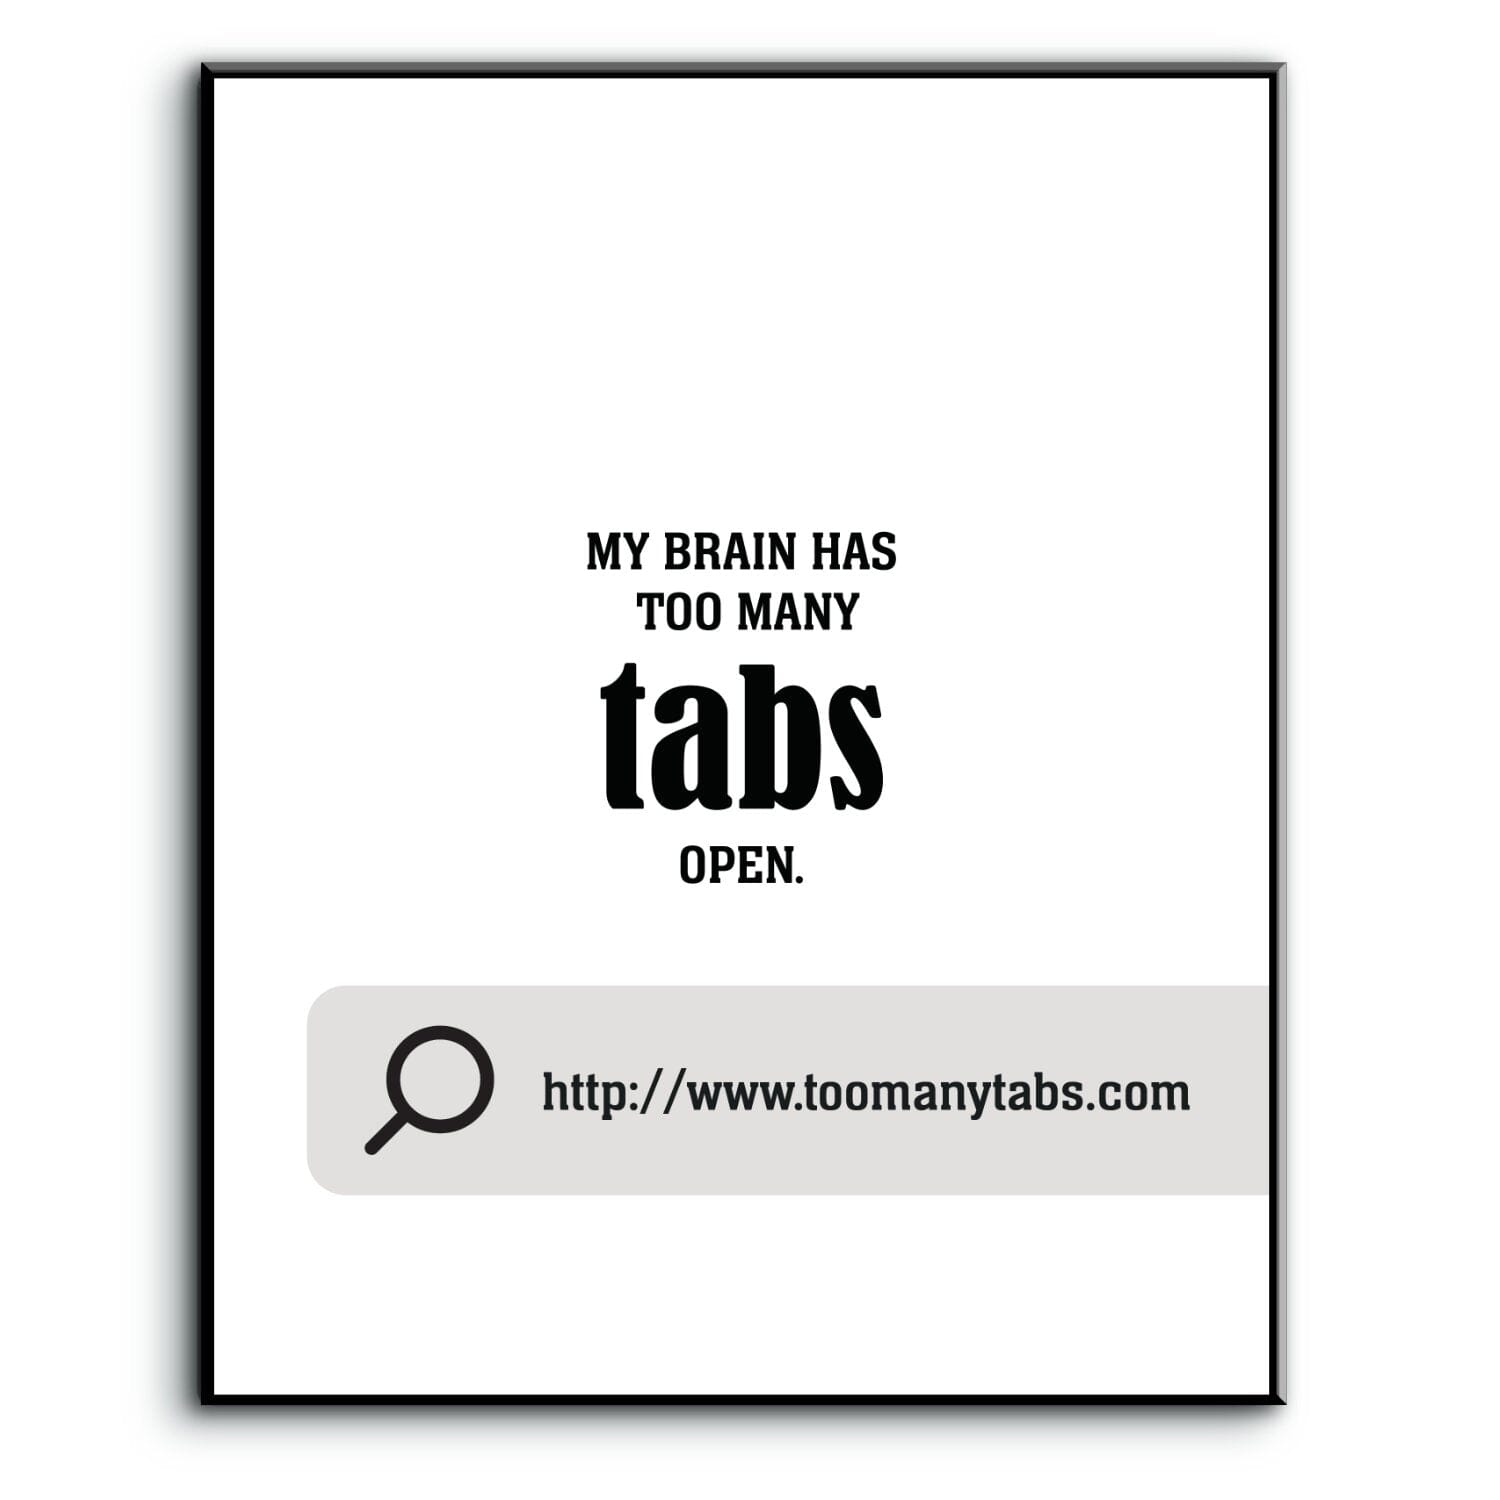 My Brain Has Too Many Tabs Open - Wise and Witty Wall Art Wise and Wiseass Quotes Song Lyrics Art 8x10 Plaque Mount 